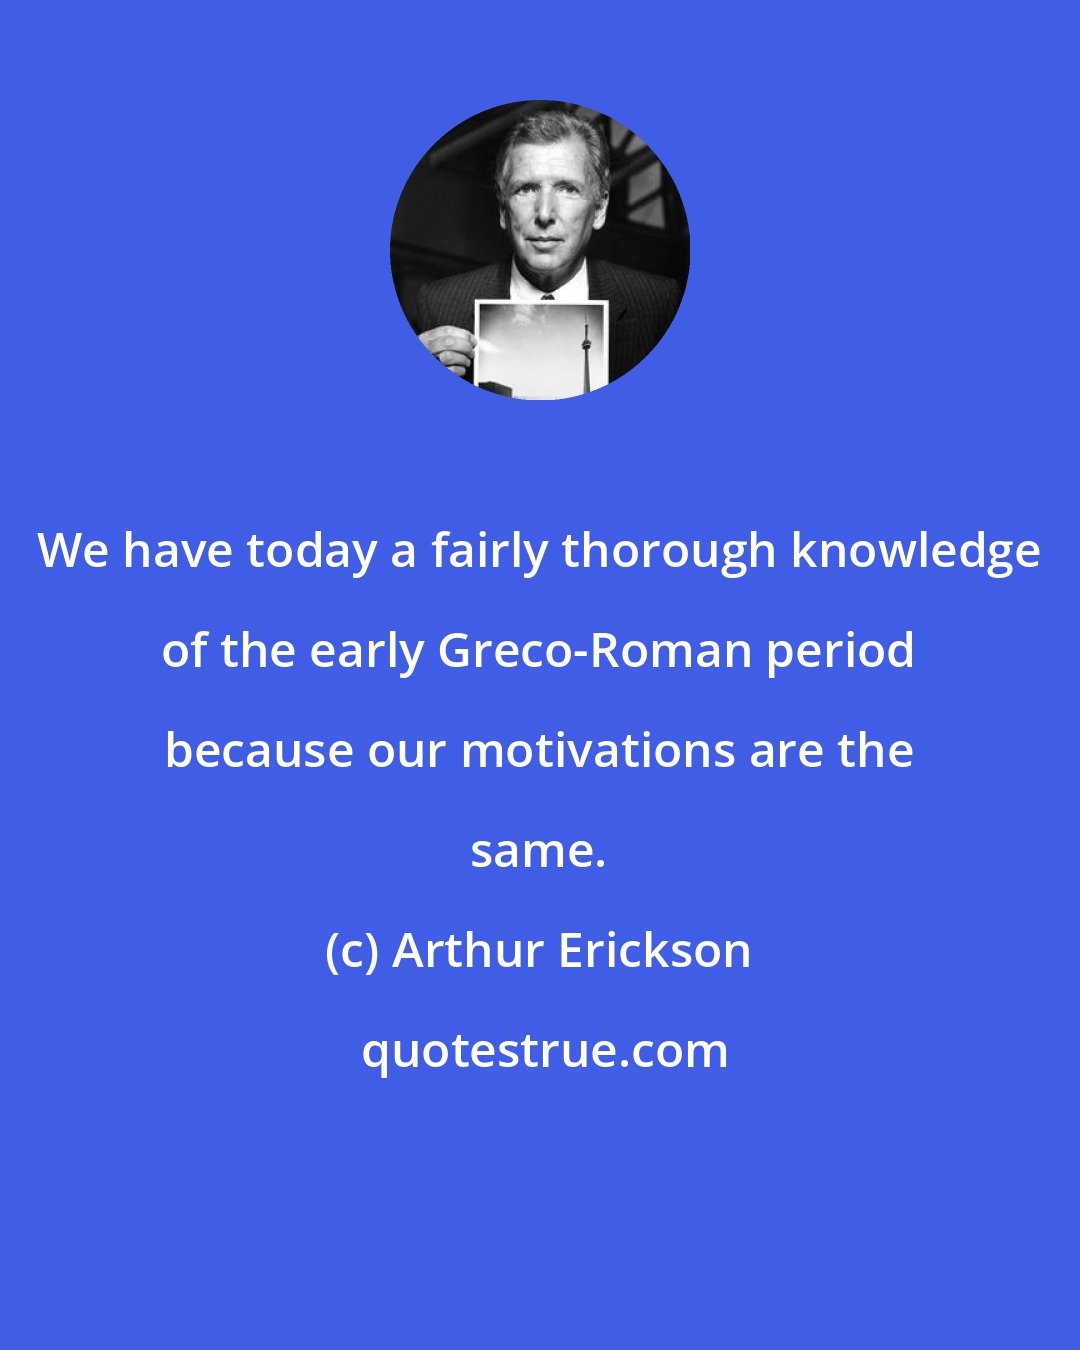 Arthur Erickson: We have today a fairly thorough knowledge of the early Greco-Roman period because our motivations are the same.